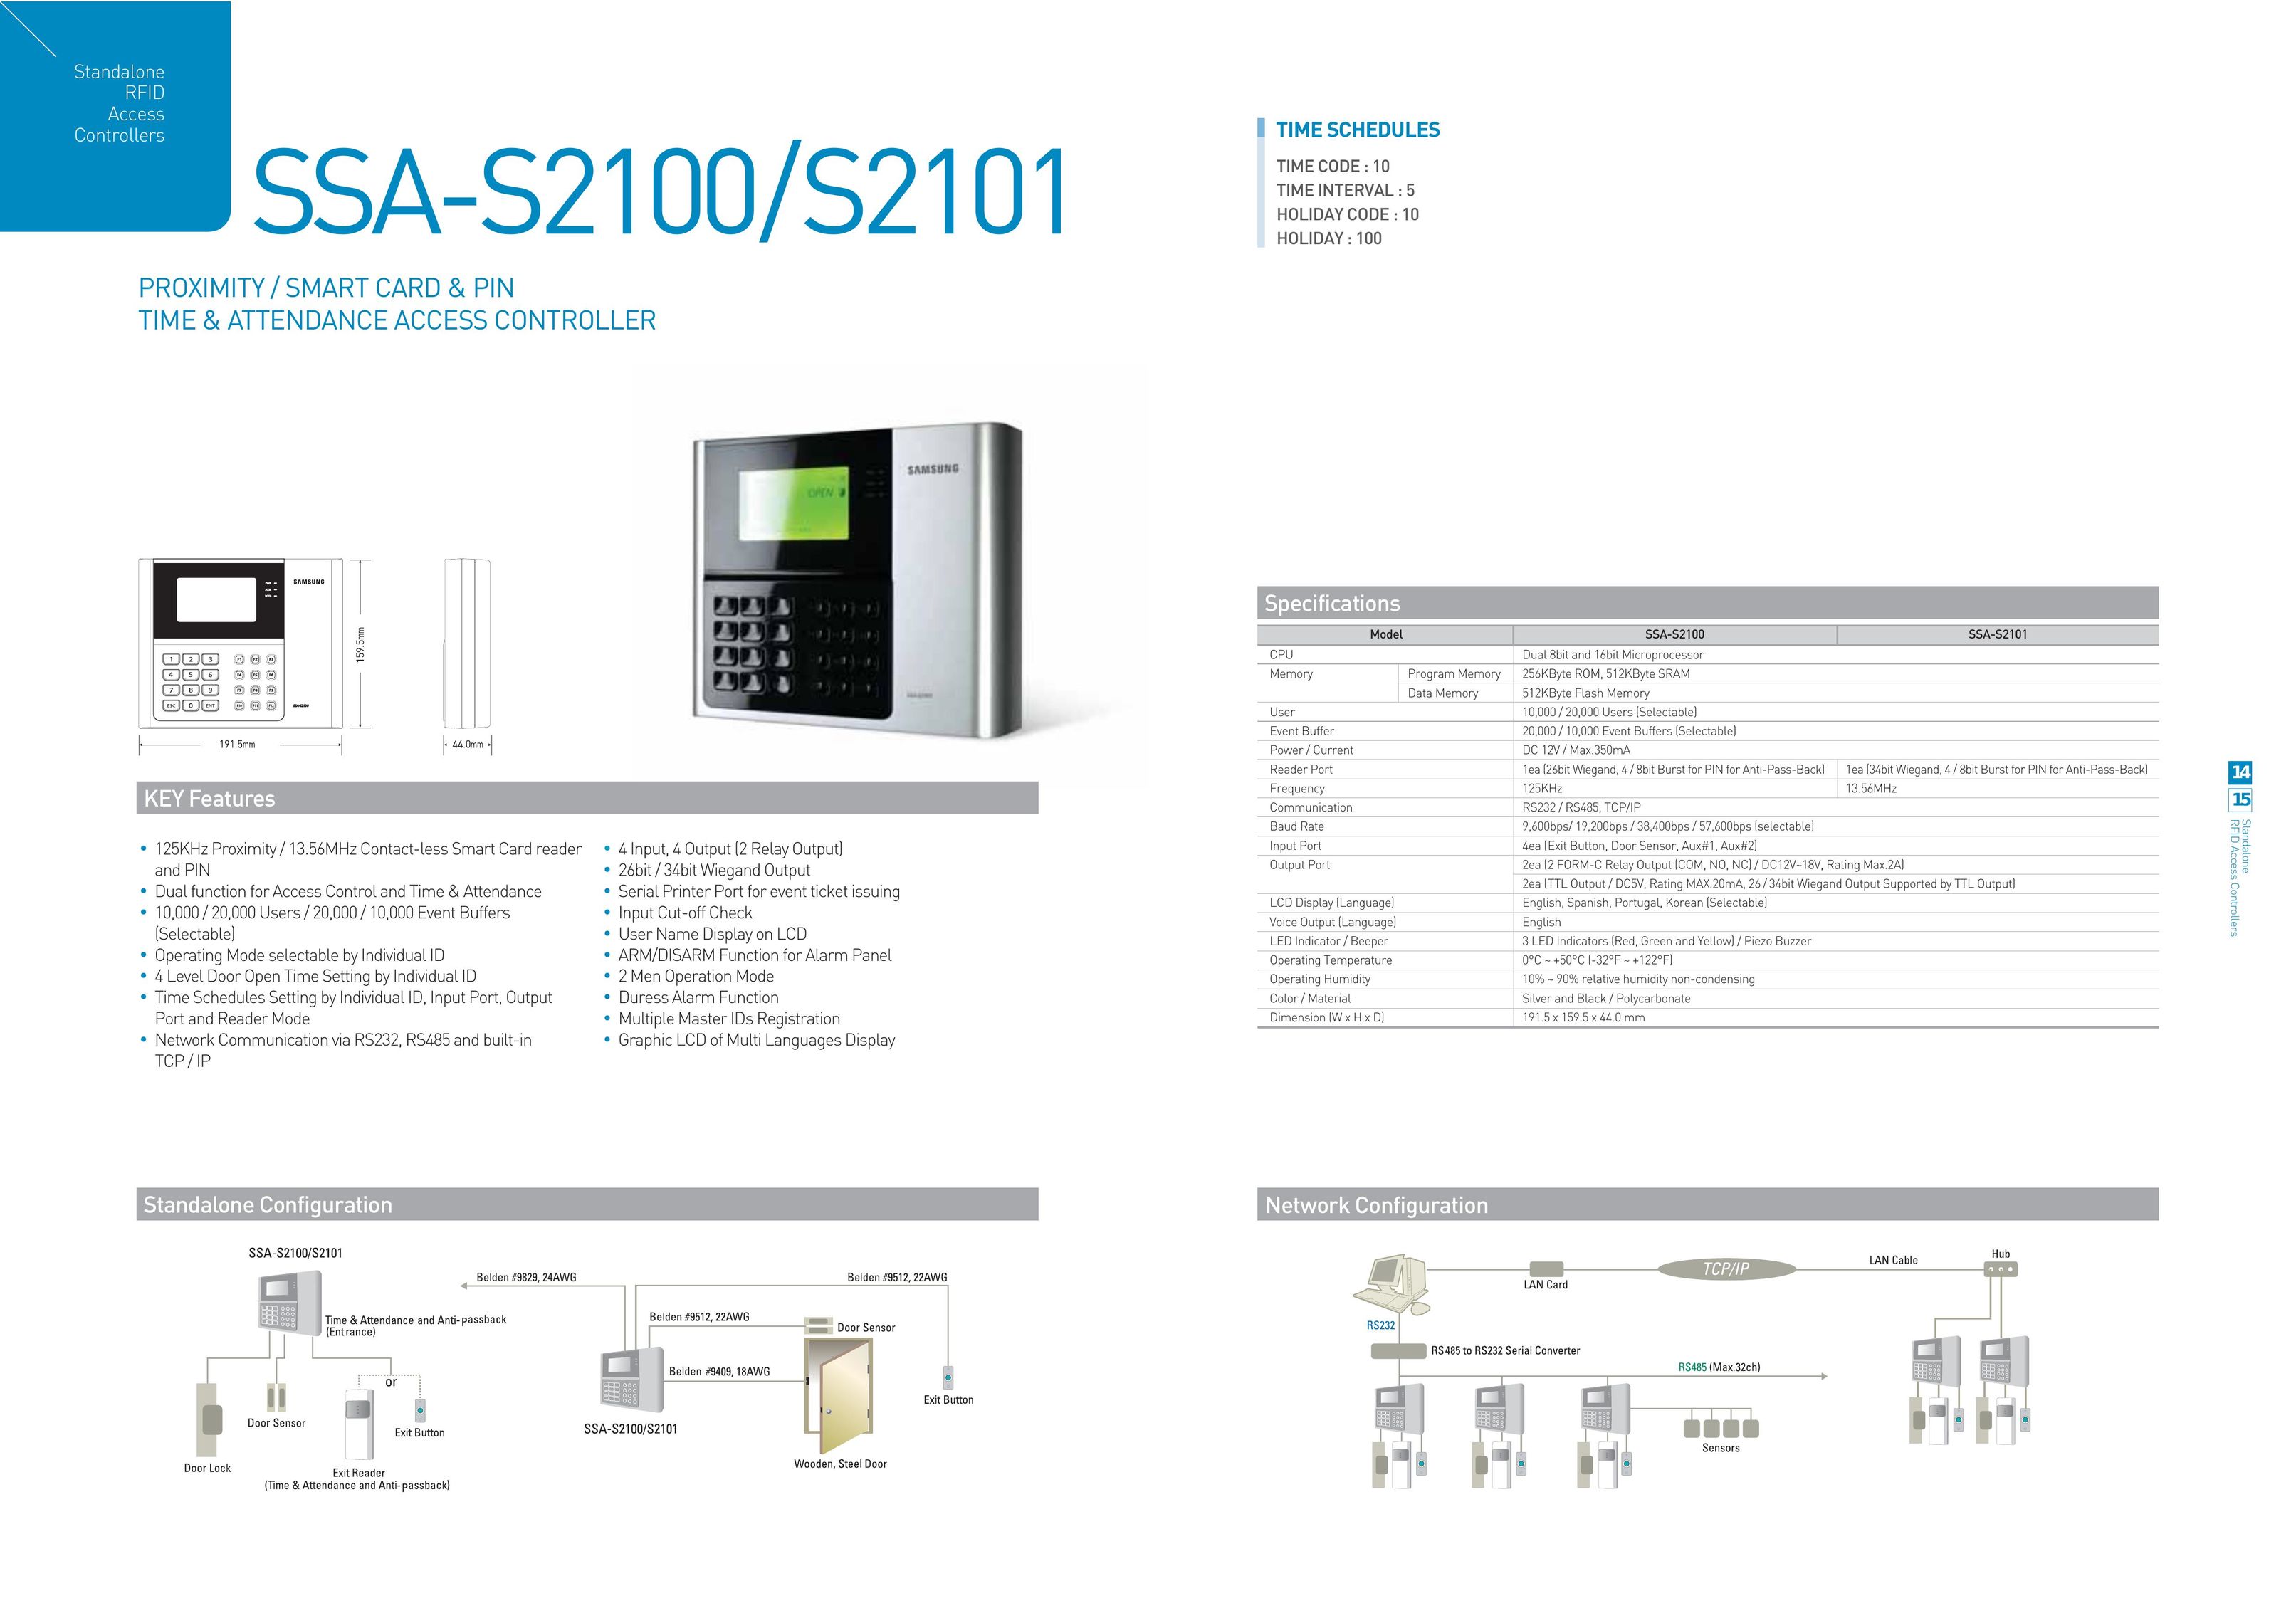 Samsung SSA-S2100 Home Security System User Manual